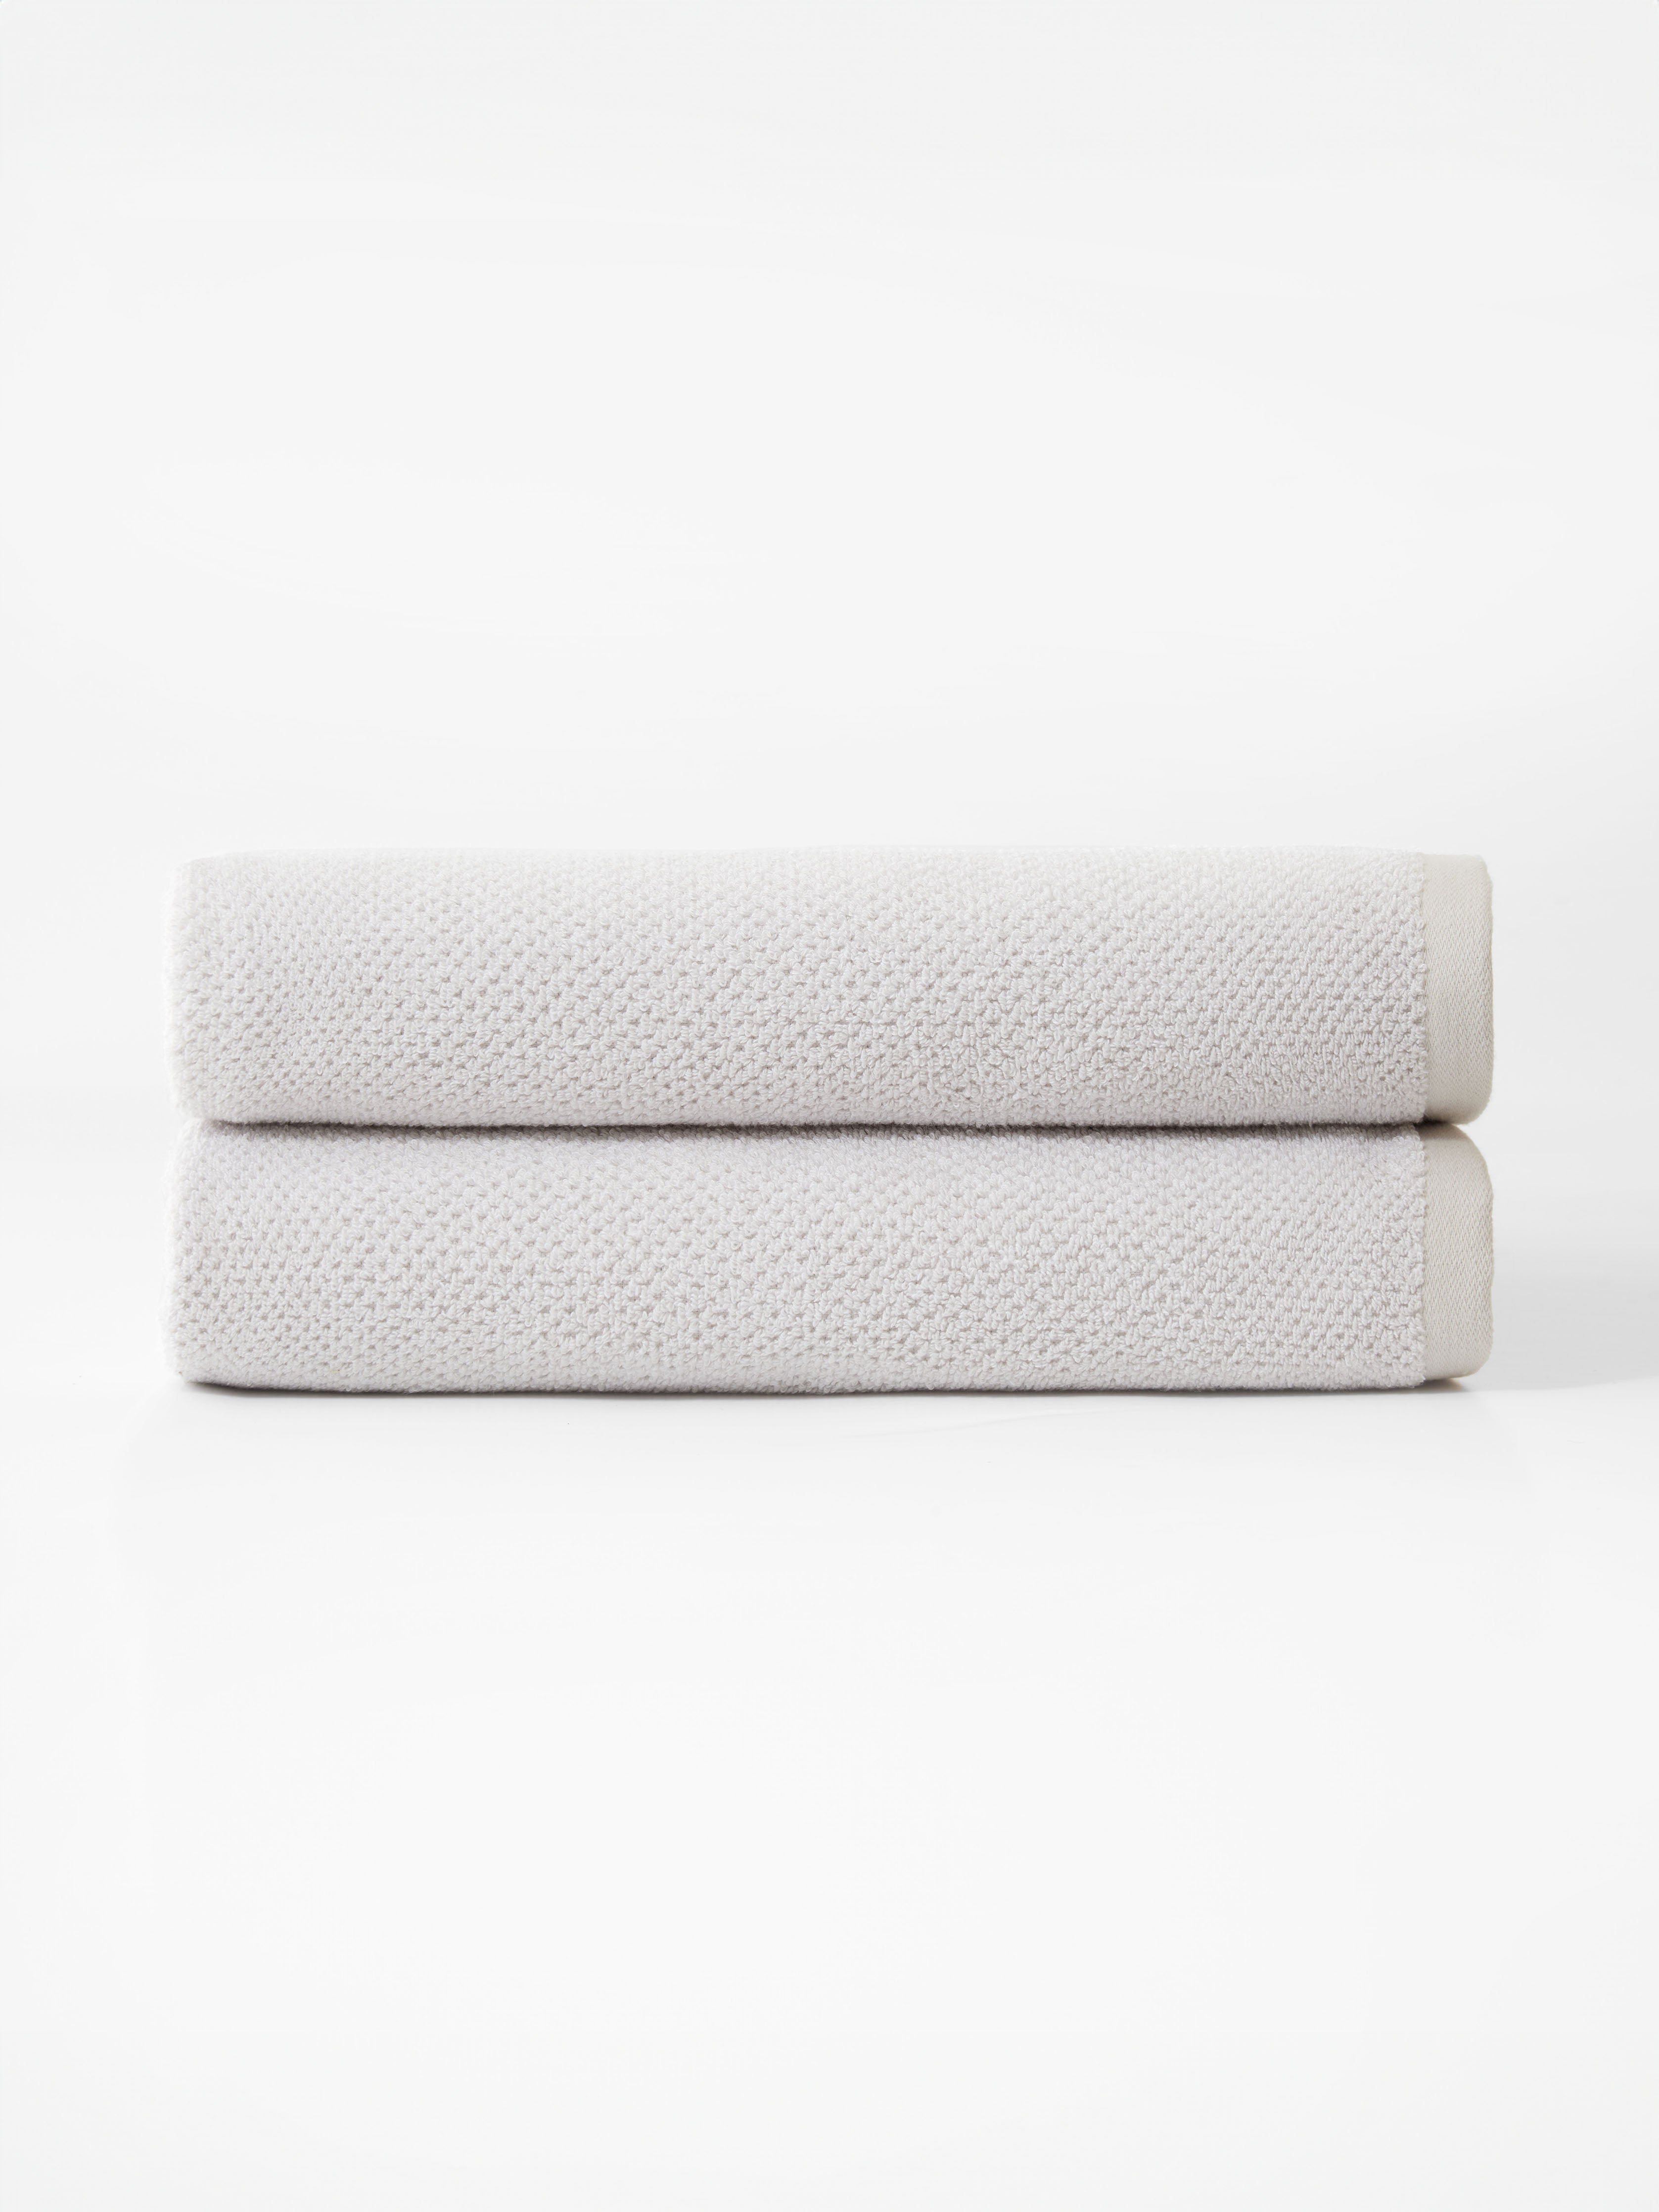 Nantucket Bath Towels in the color Heathered Light Grey. Photo of Nantucket Bath Towels taken with the bath towels on a white background. |Color: Heathered Light Grey